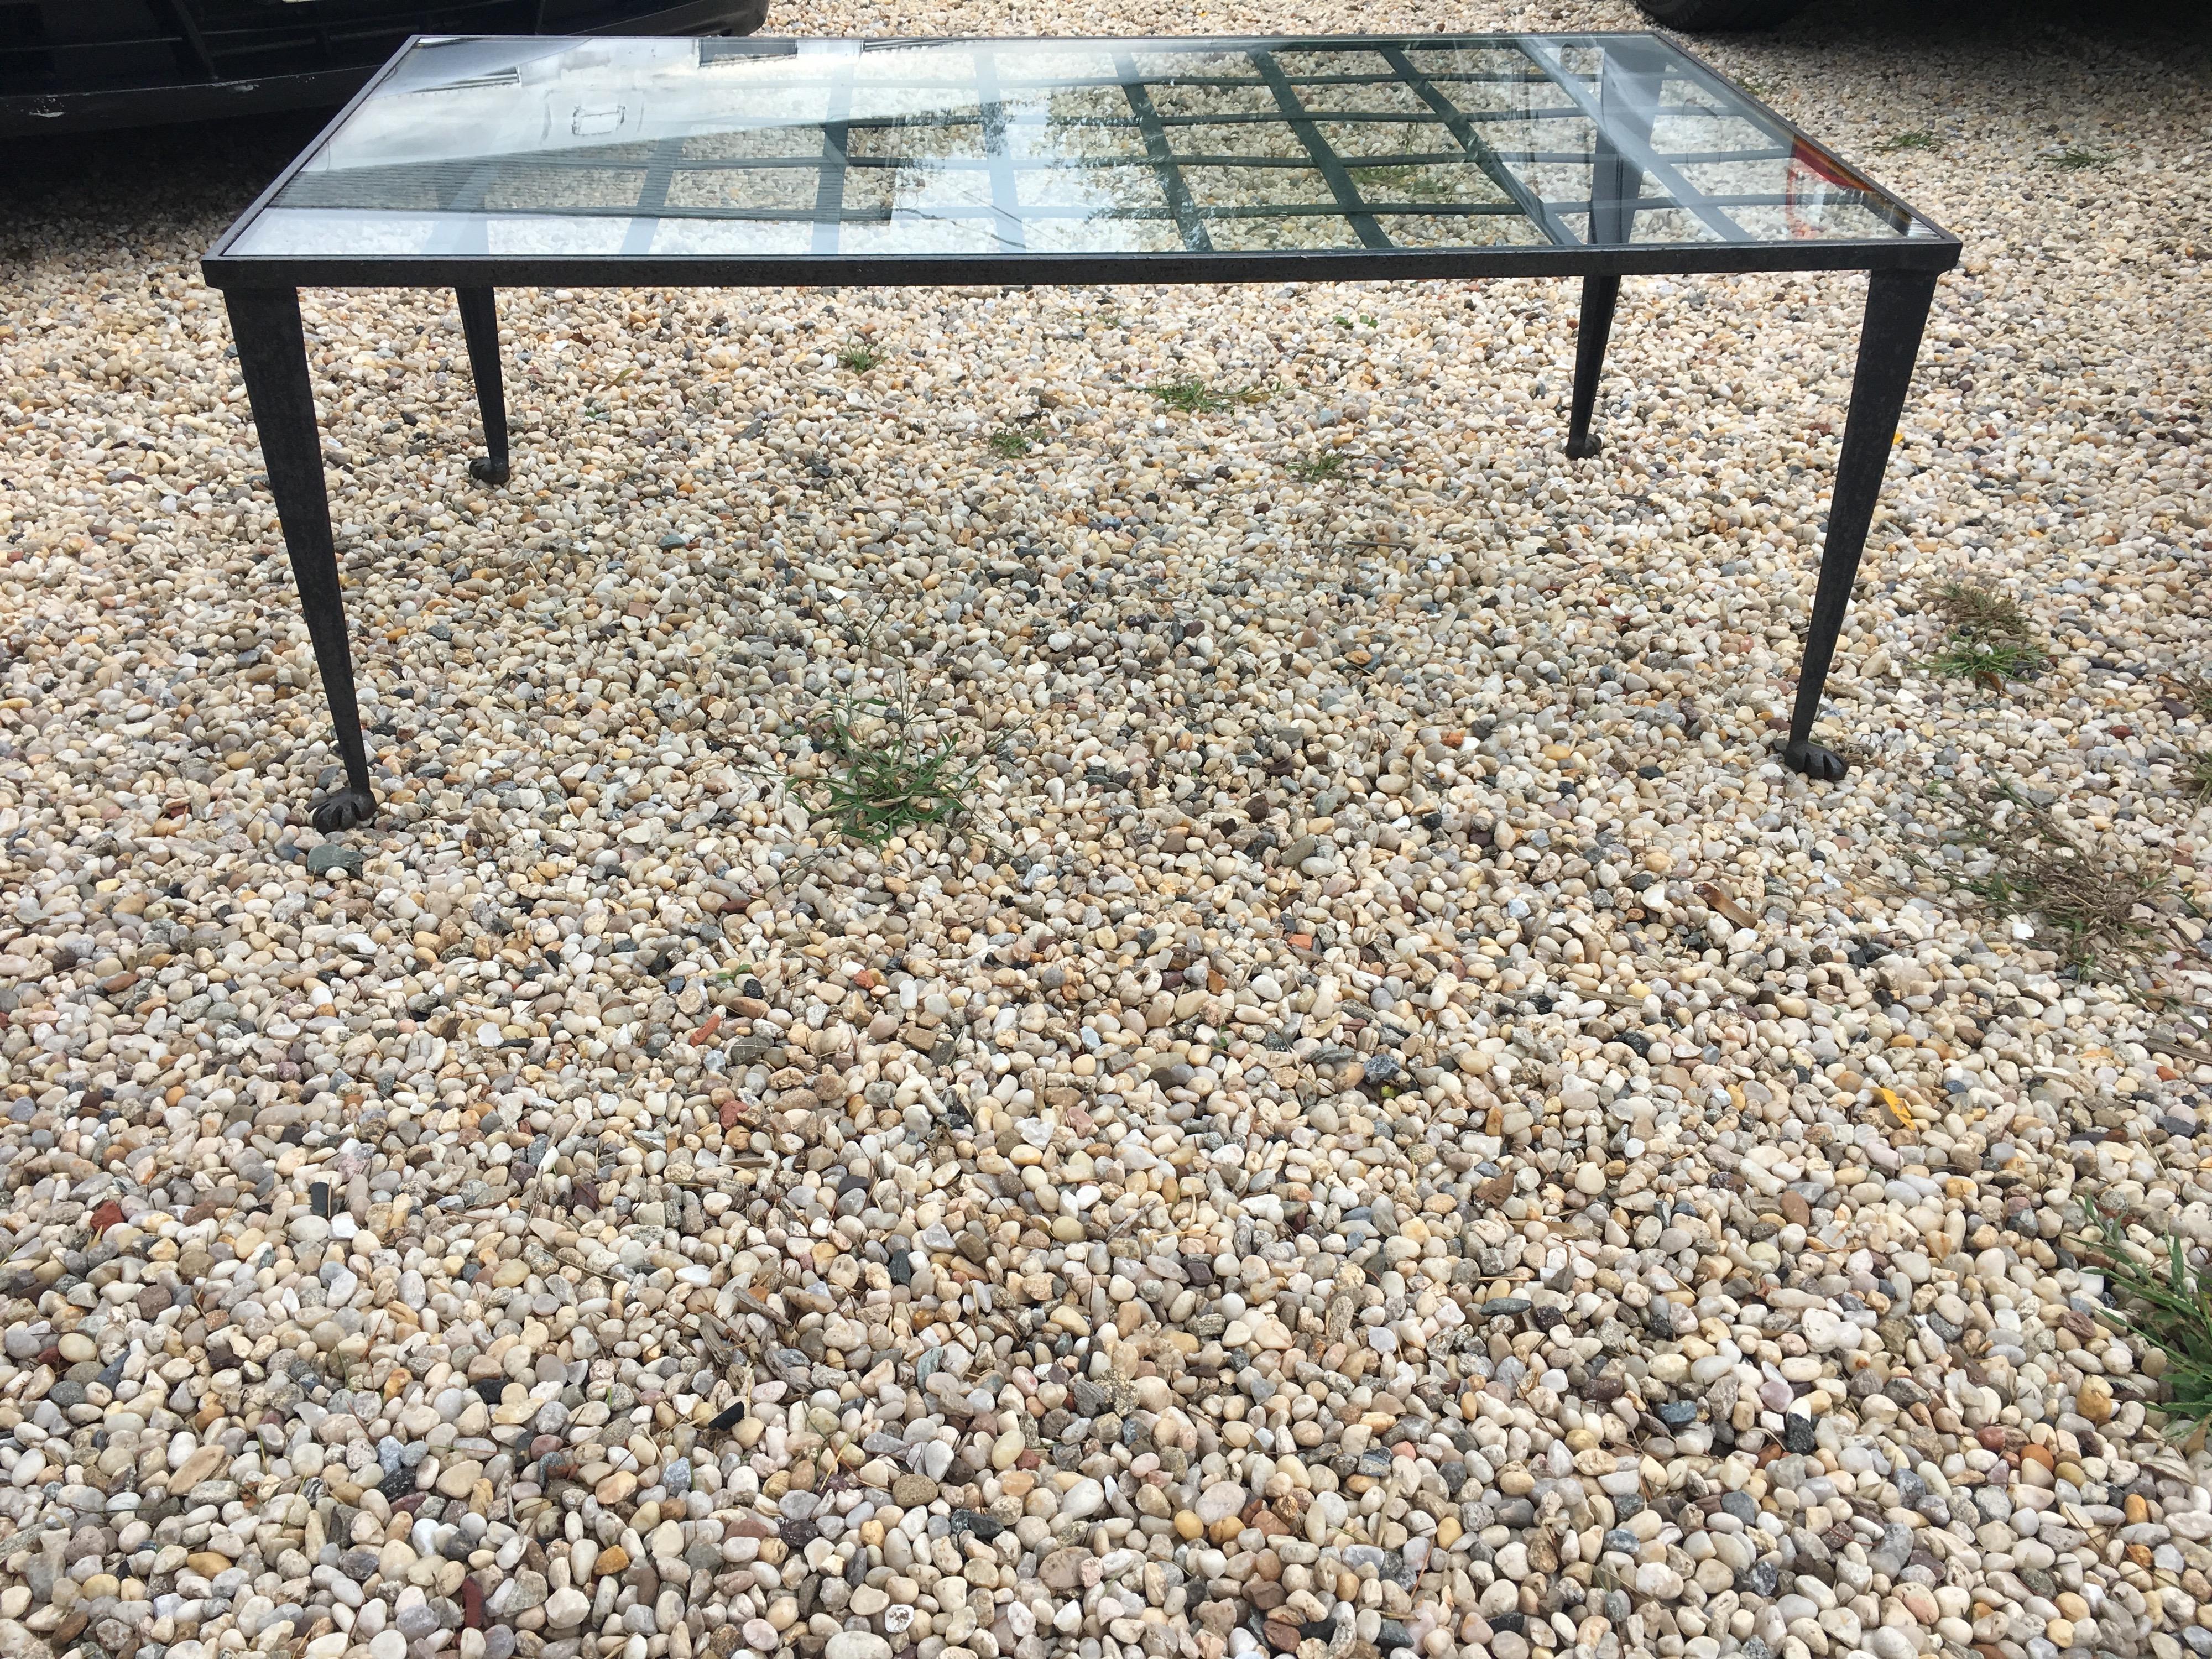 1990s vintage custom la Forge Francaise forged iron & glass coffee table
Custom iron & glass coffee table.
Hand forged by La Forge Francaise, iron straps holding a piece of glass. One small chip in one corner of the glass. Tapered legs with feet